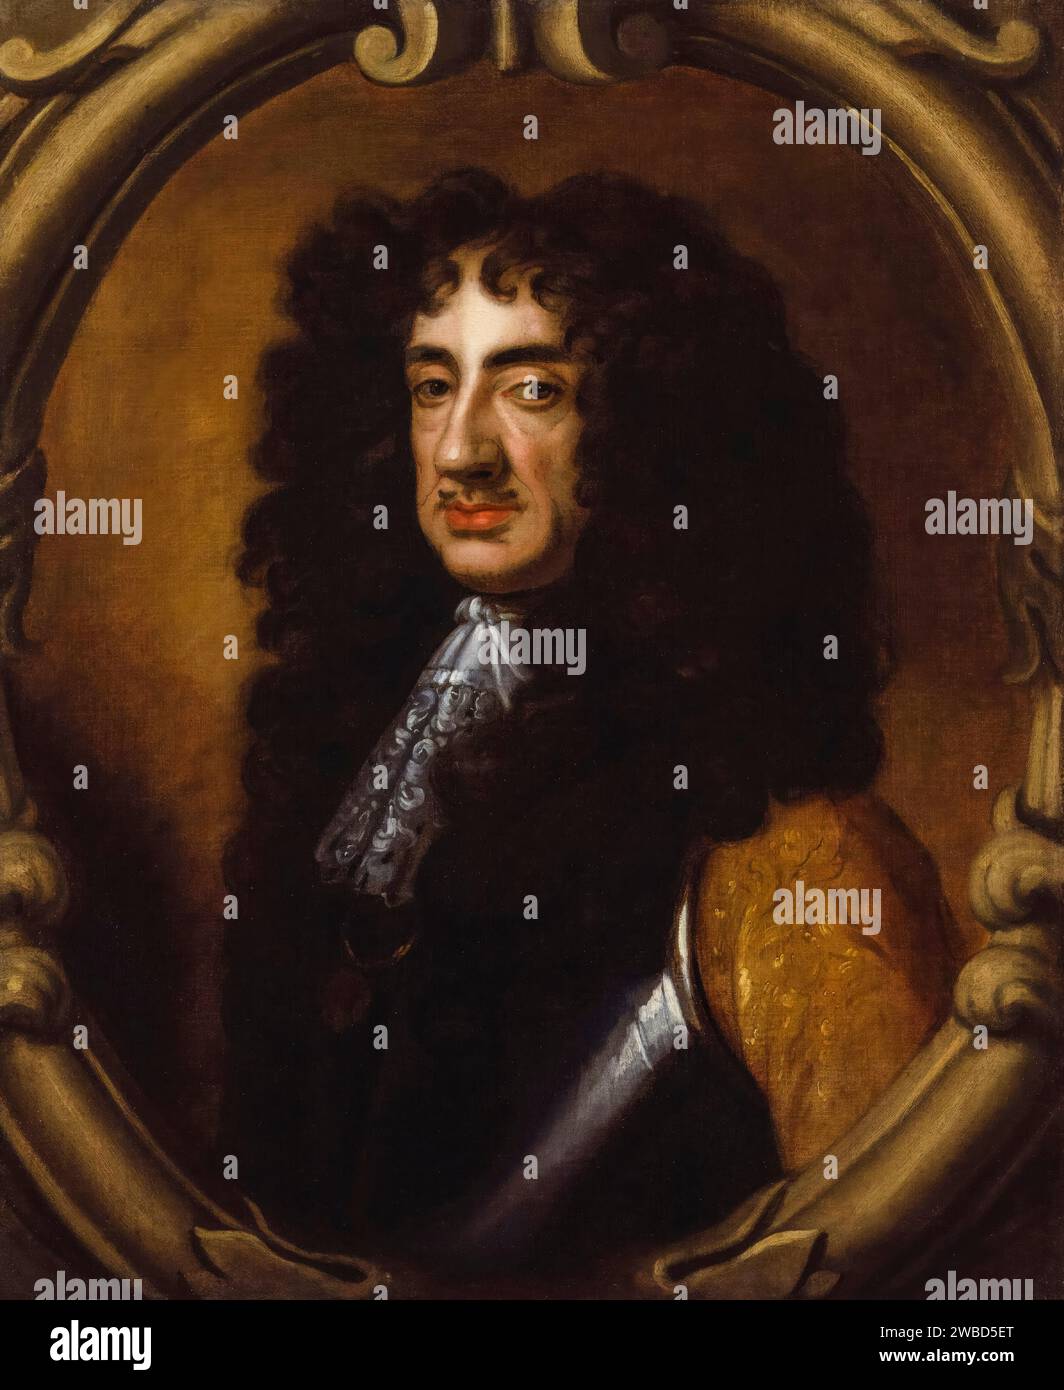 King Charles II of England (1630-1685), portrait painting in oil on canvas after Sir Peter Lely or possibly Mary Beale, before 1699 Stock Photo